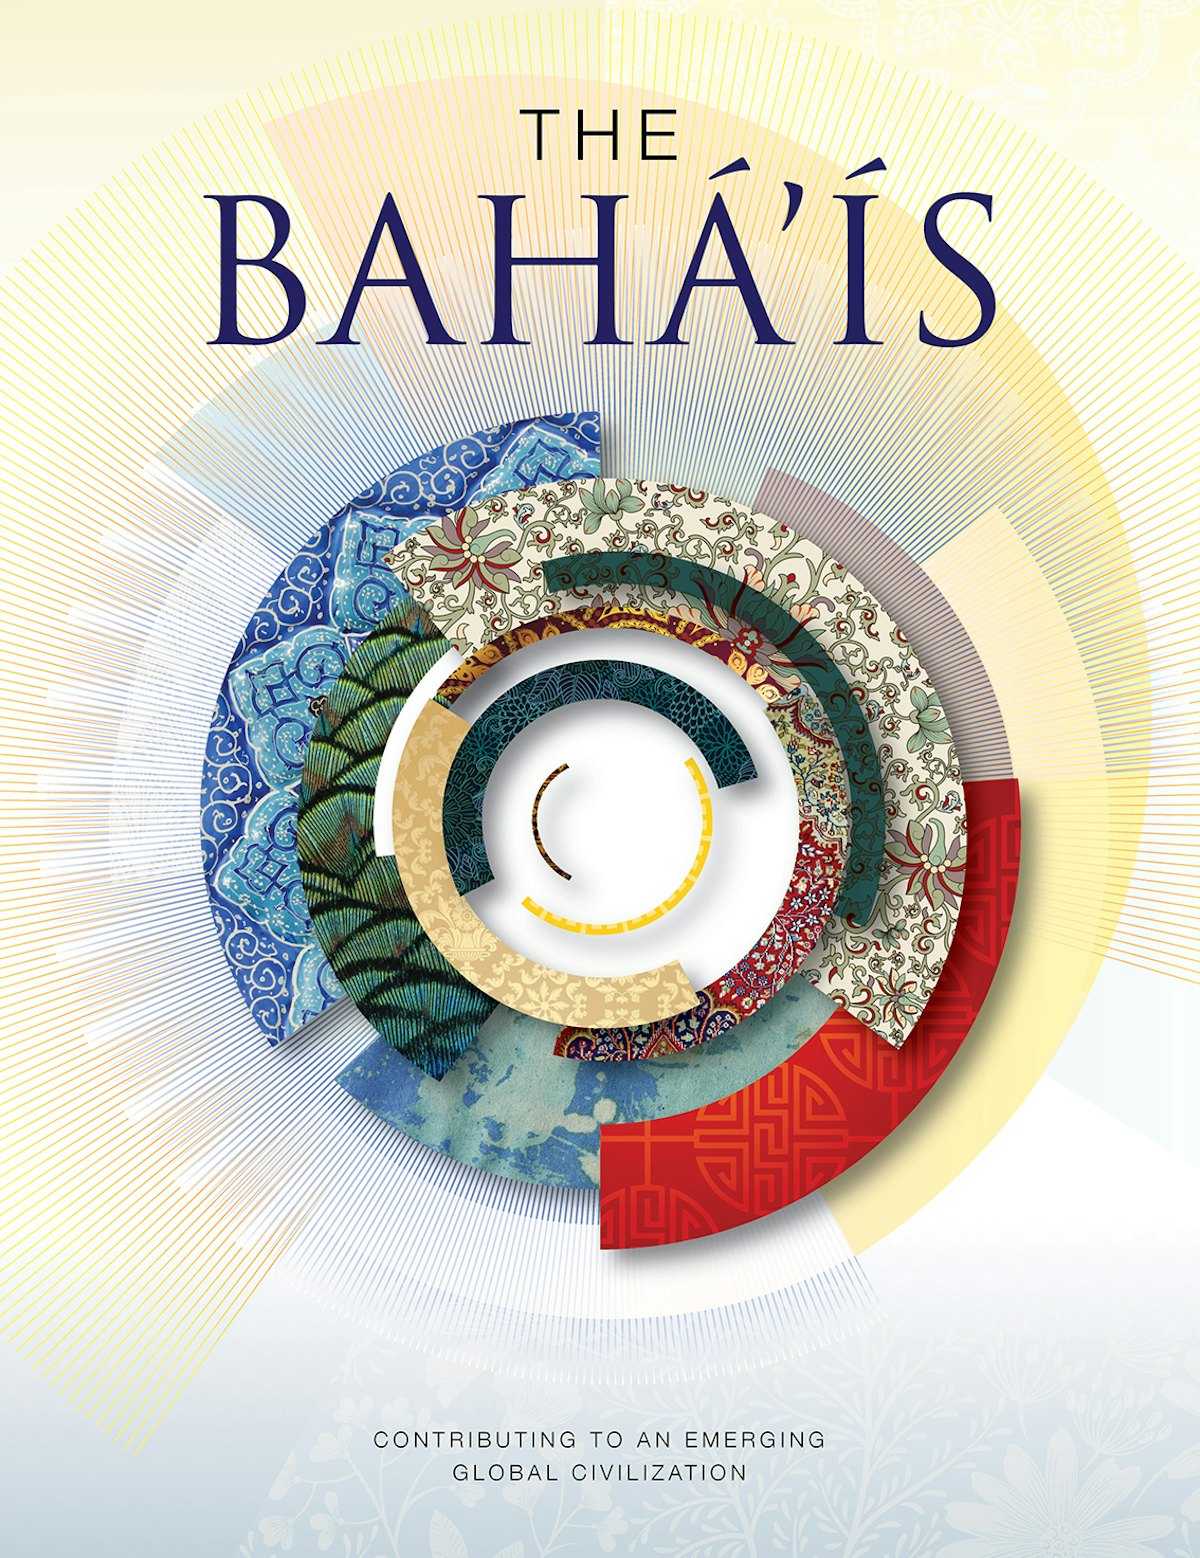 The front cover of The Baha'is